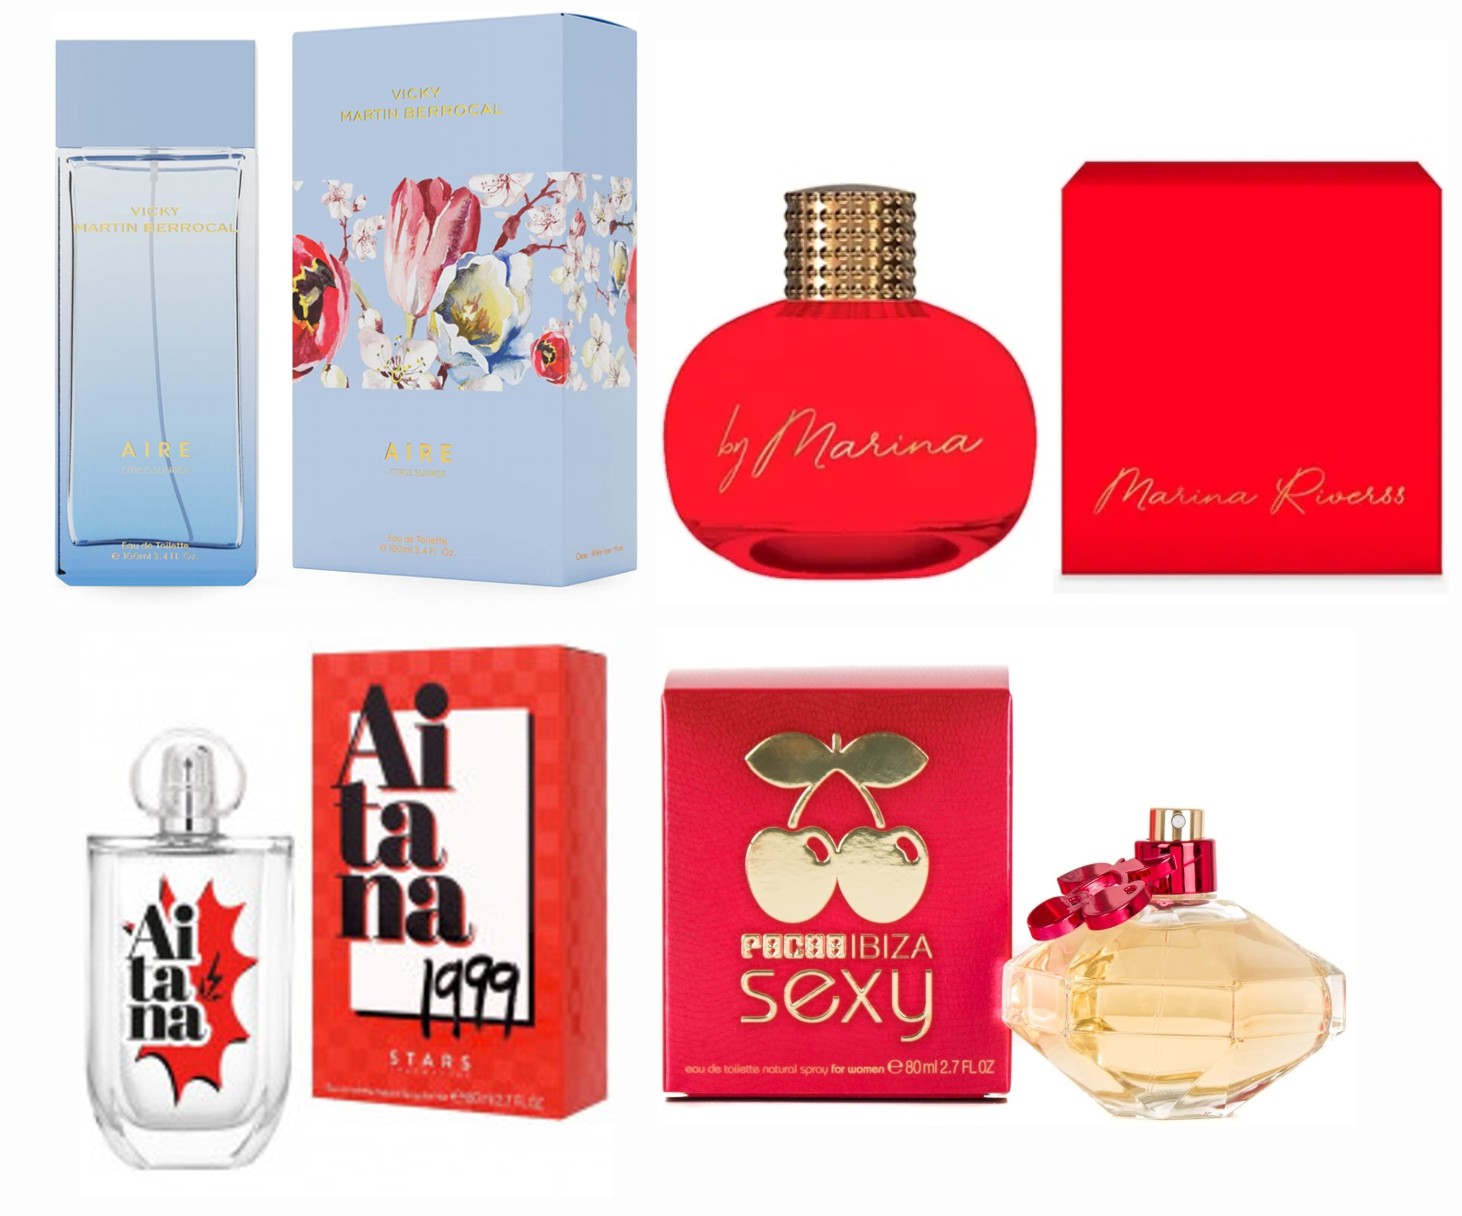 LOTE 3 DE MUJER: VICKY MARTIN BERROCAL AIRE WOMAN EDT 100 ML @ + MARINA RIVERS EDP 100 ML @ (Sin caja) + AITANA 1999 EDT 80 ML @ + PACHA QUEEN SEXY EDT 80 ML @